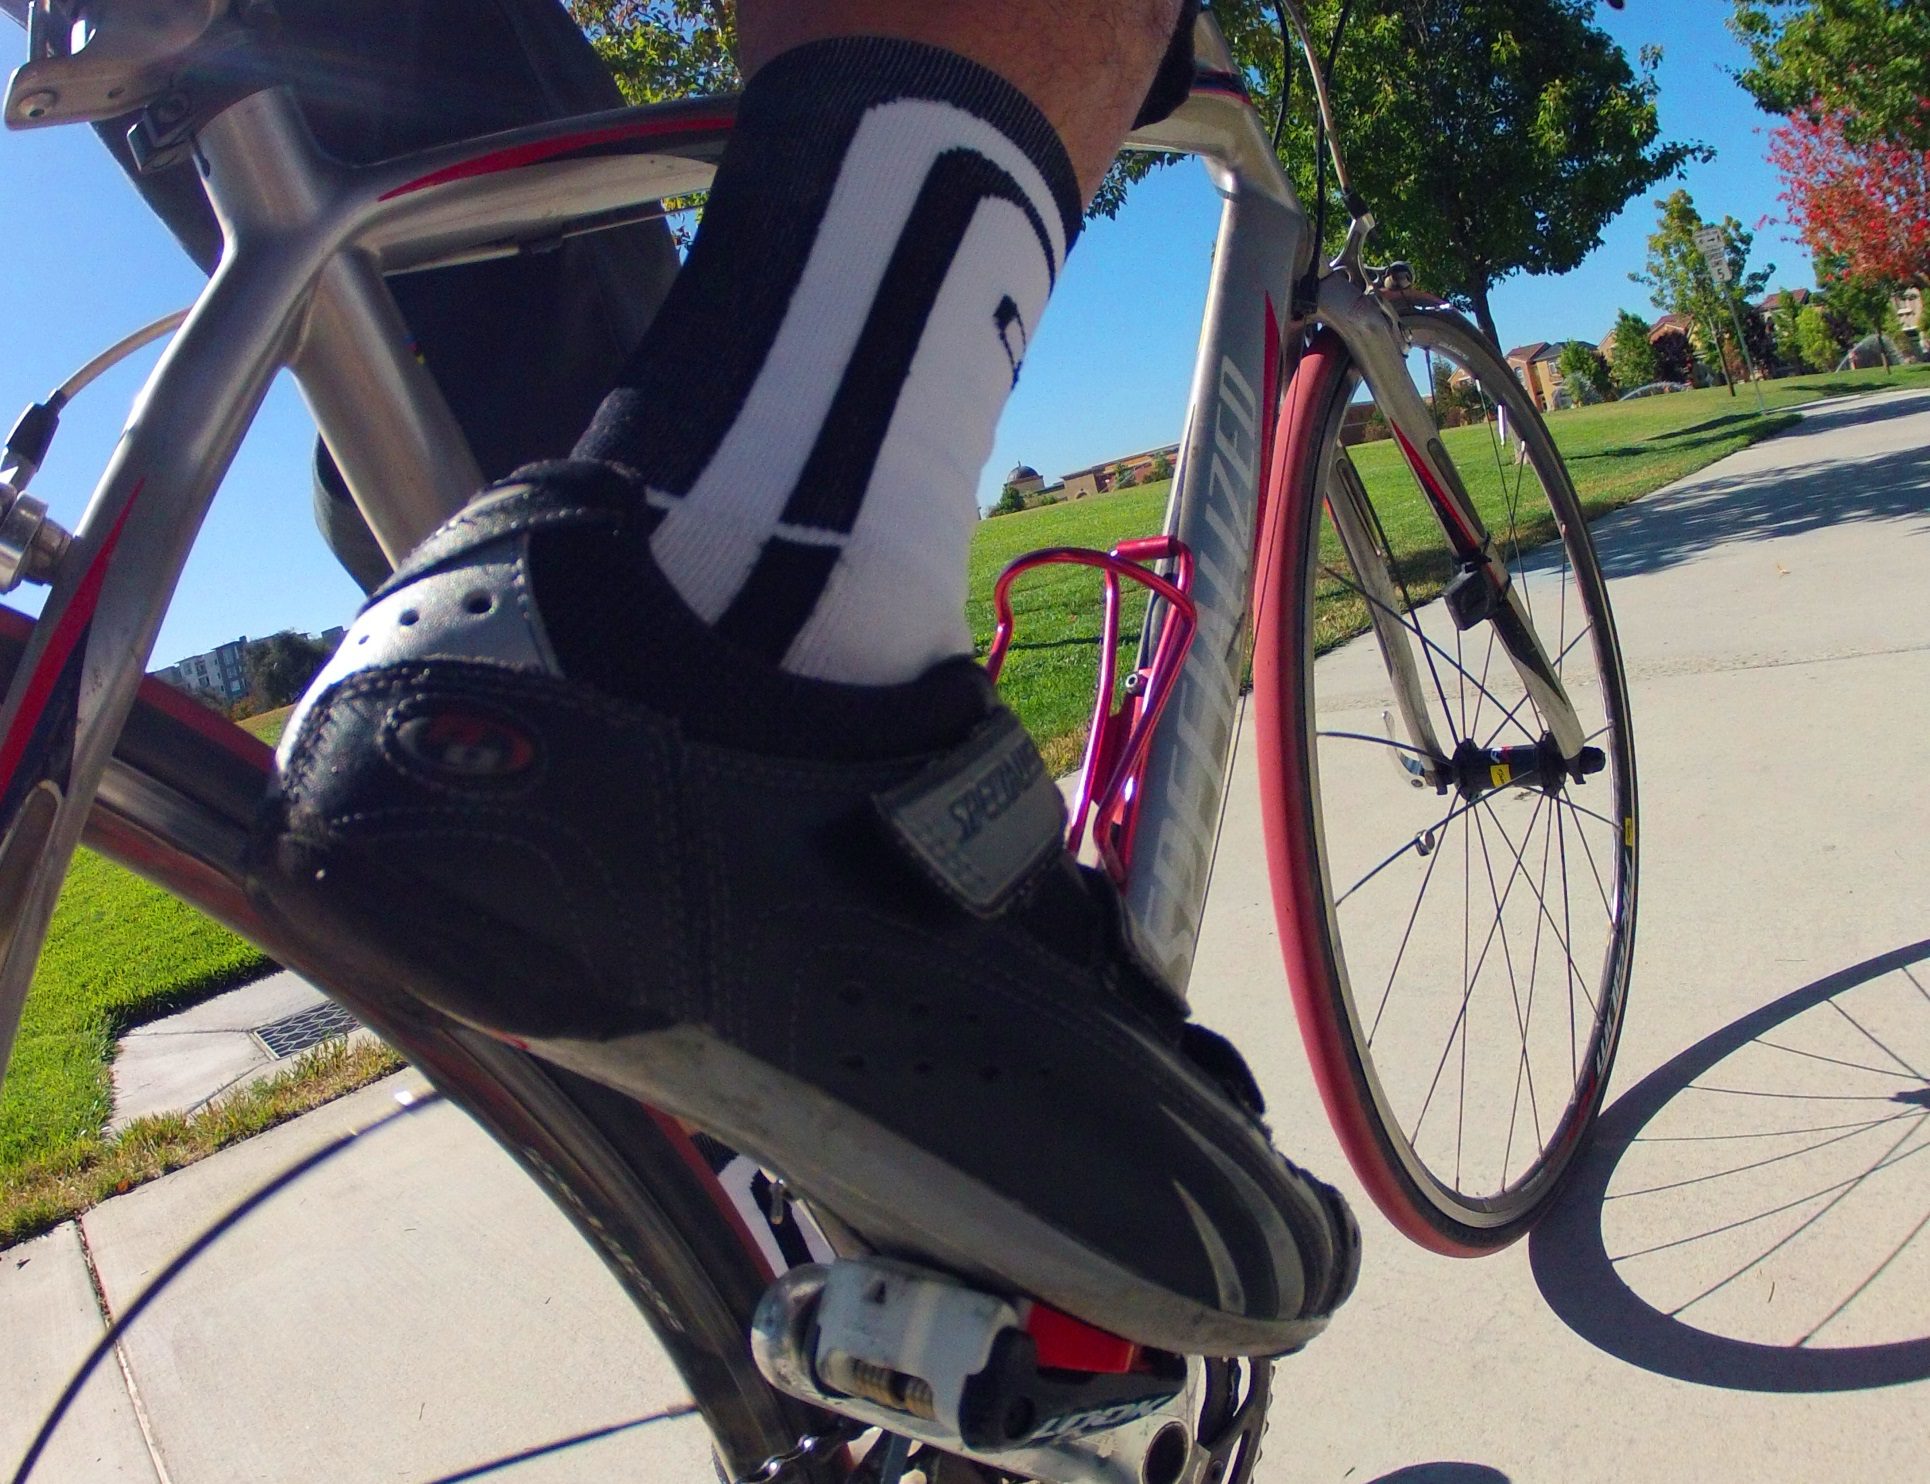 The Perfect Pedal Stroke and How to Train for It